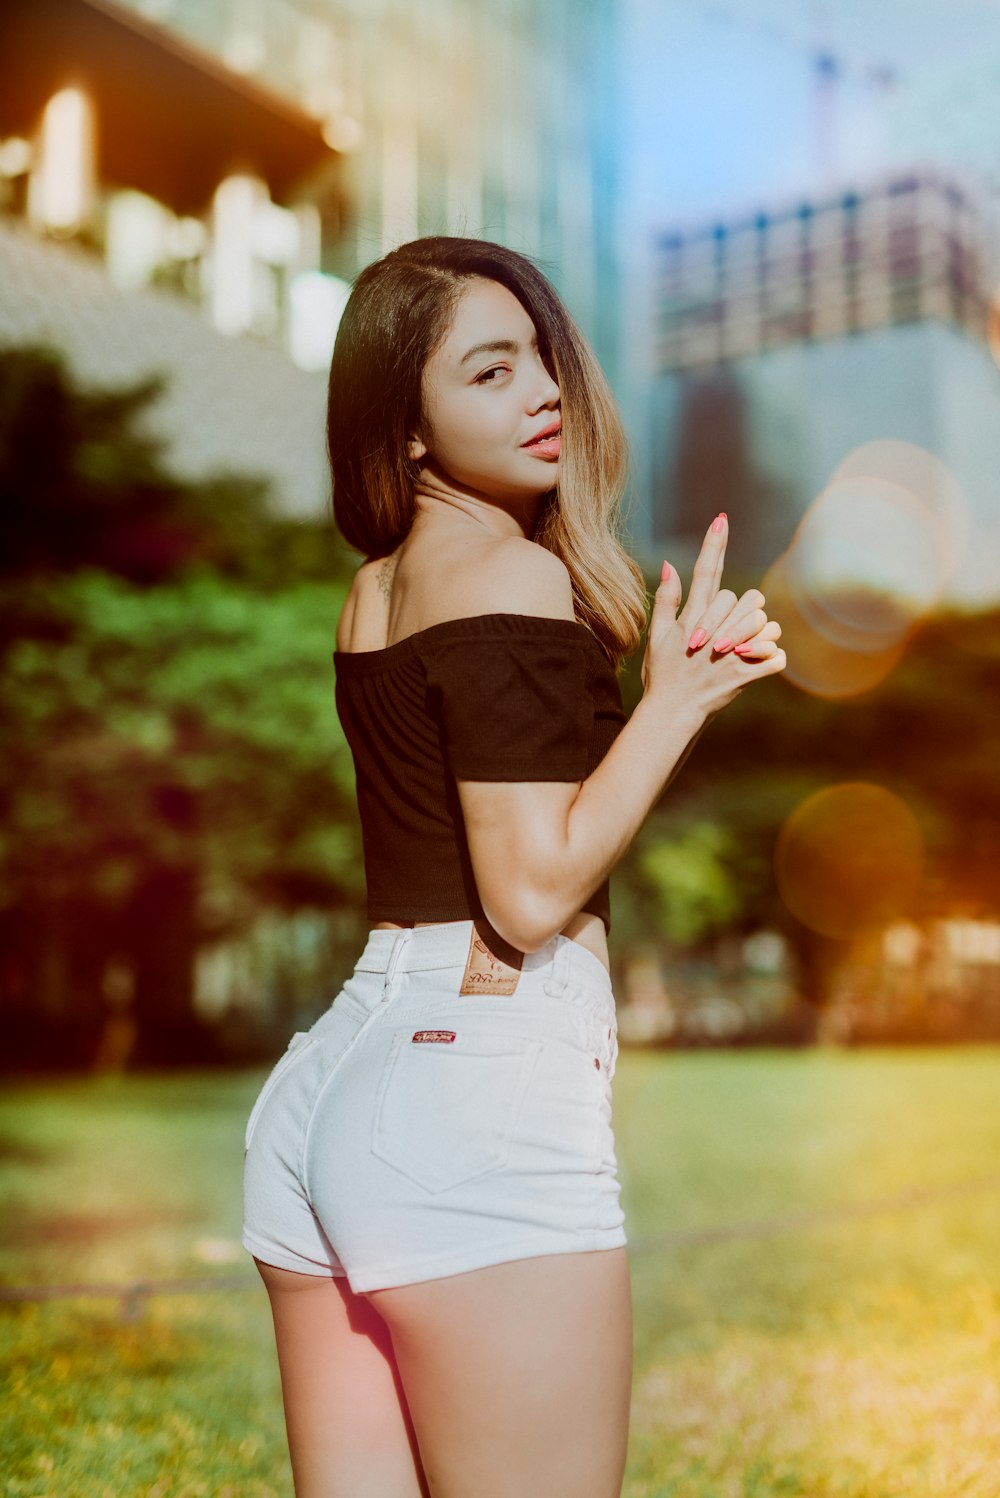 Woman Wearing Black Off Shoulder Top And White Short Shorts Photo Free Philippines Image On